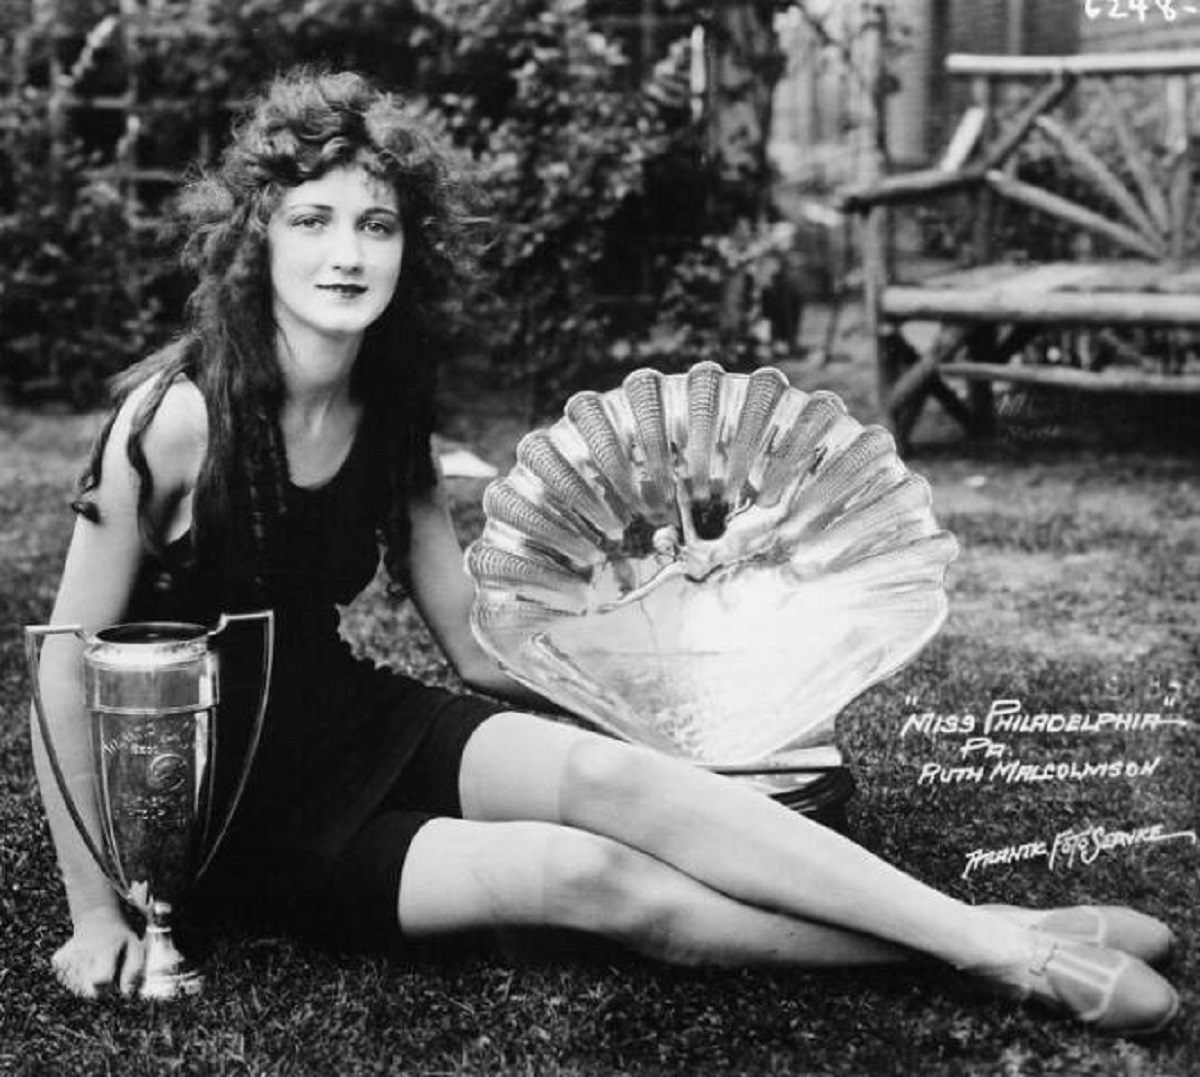 "In 1924, Ruth Malcomson Was Crowned Miss America At The Age Of 18, Following Her Victory As Miss Philadelphia In 1923"